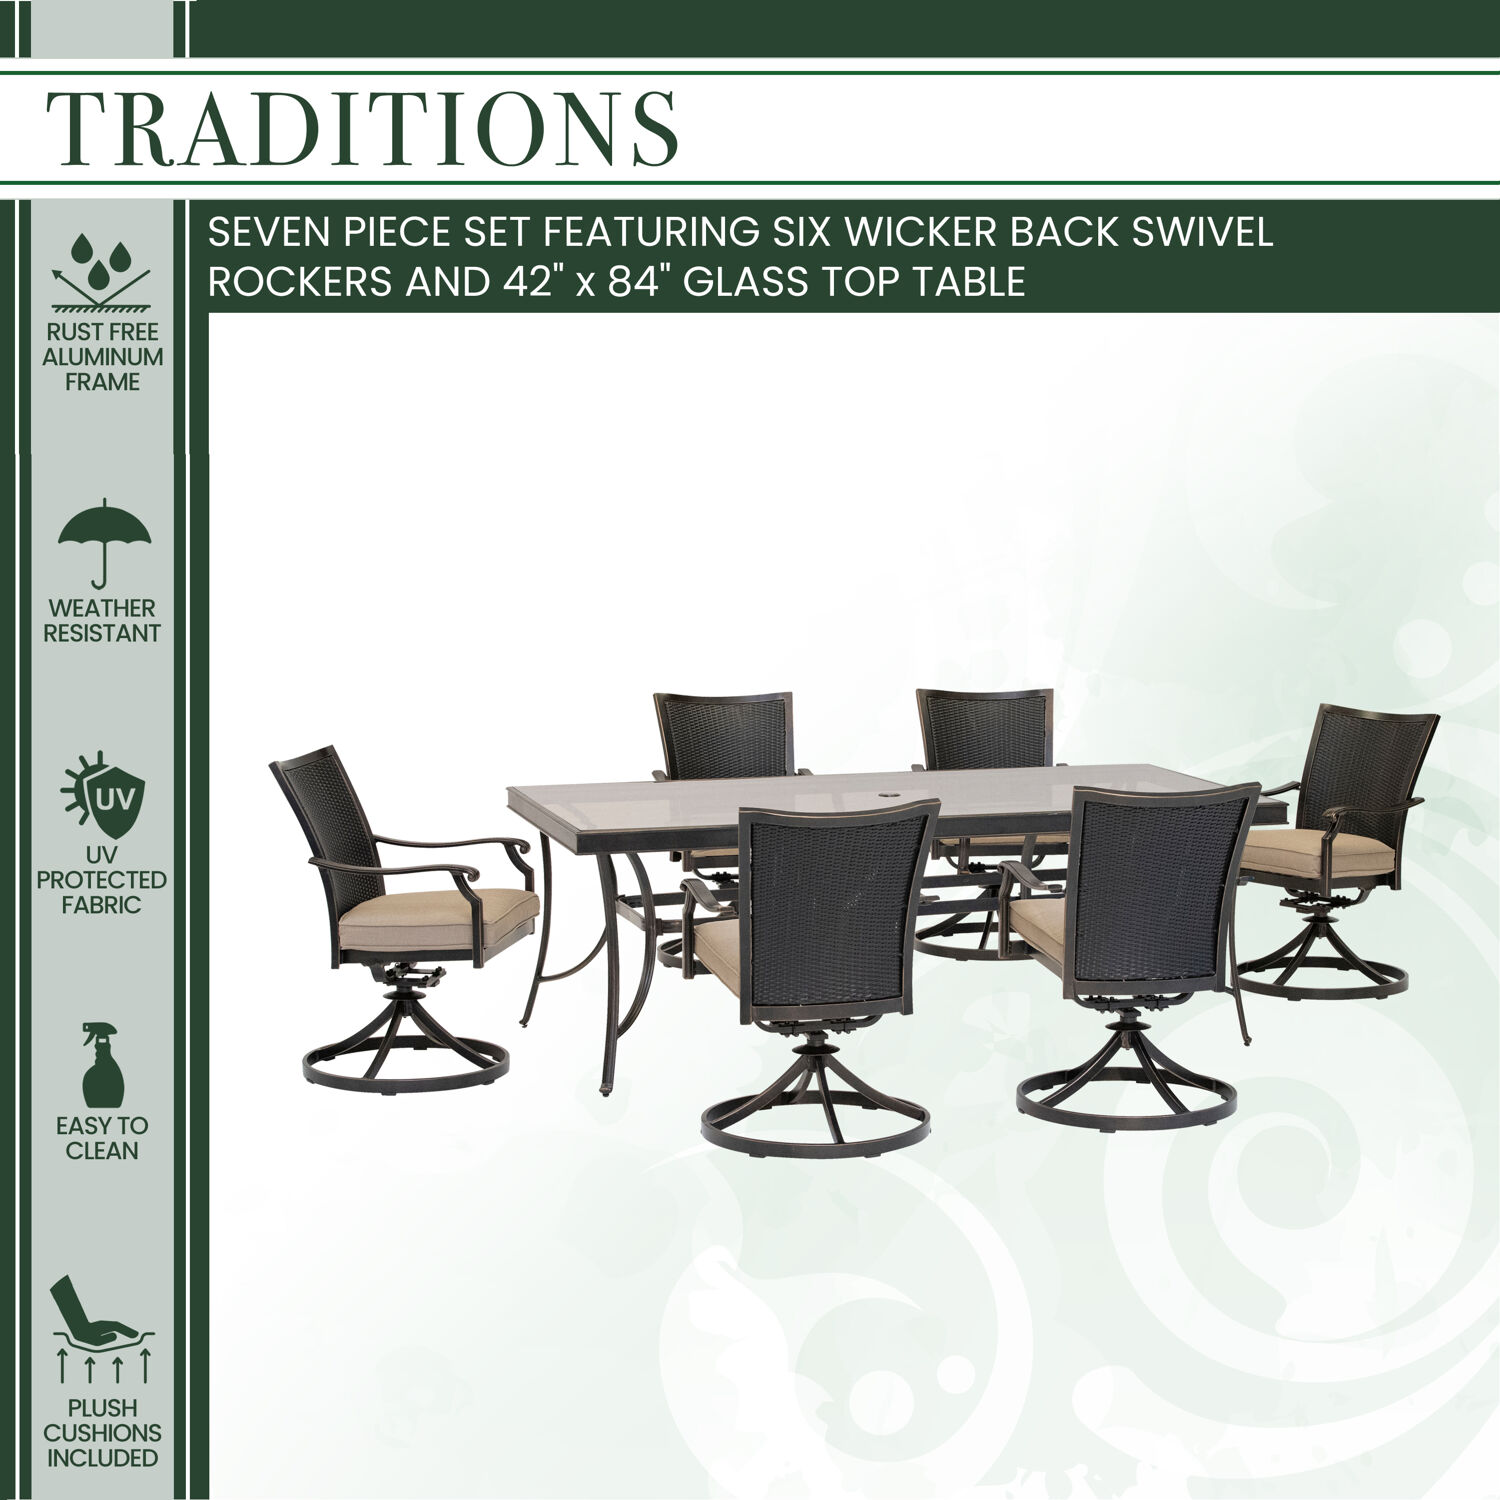 Hanover Traditions 7-Piece Dining Set in Tan with 6 Wicker Back Swivel Rockers and Extra Large 42 in. x 84 in. Glass-Top Table - image 3 of 9